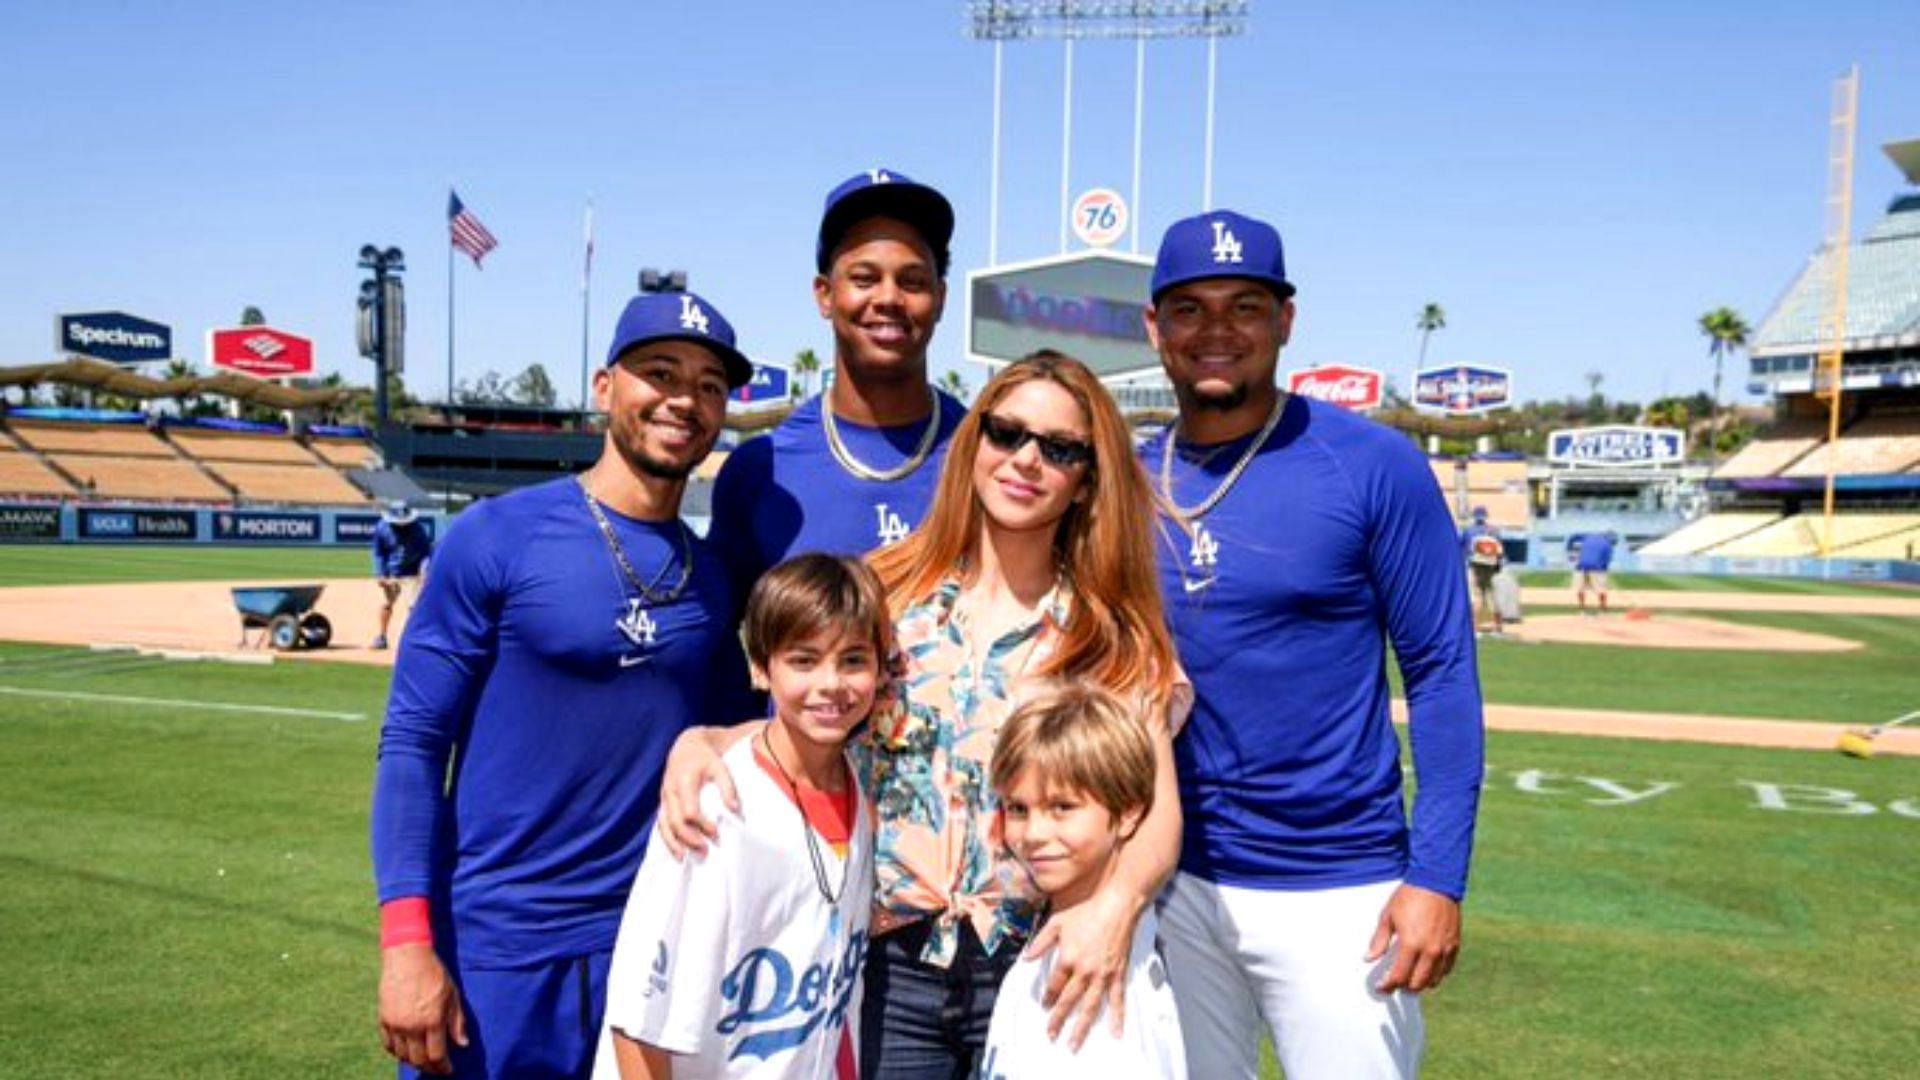 The Columbian popstar with her kids at Dodger Stadium